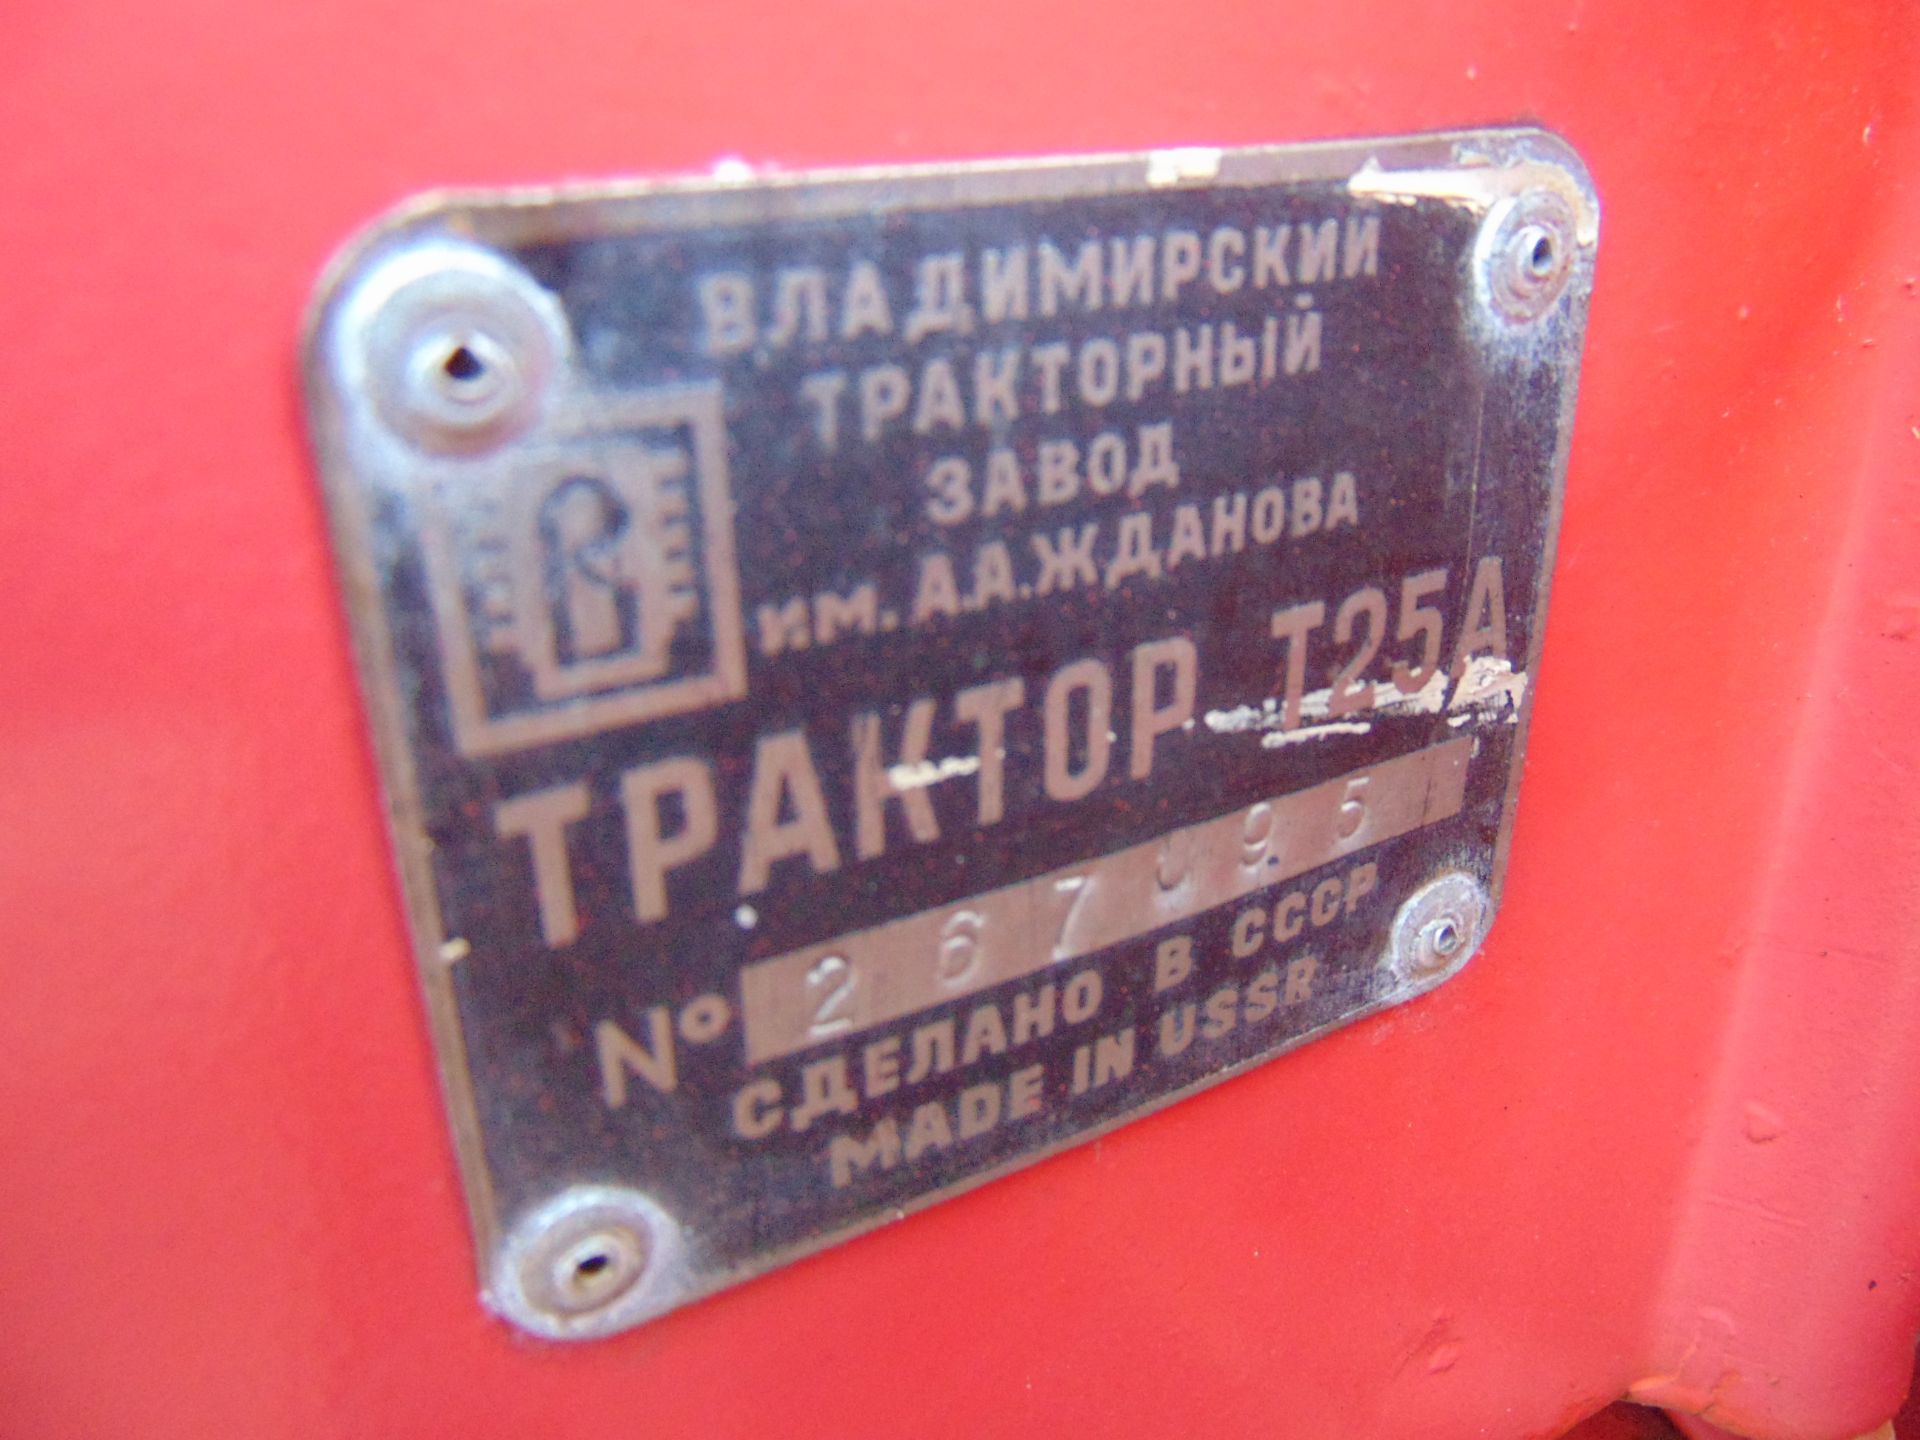 Very Rare USSR Belarus 250 2WD Tractor Very Low Hours! - Image 12 of 26